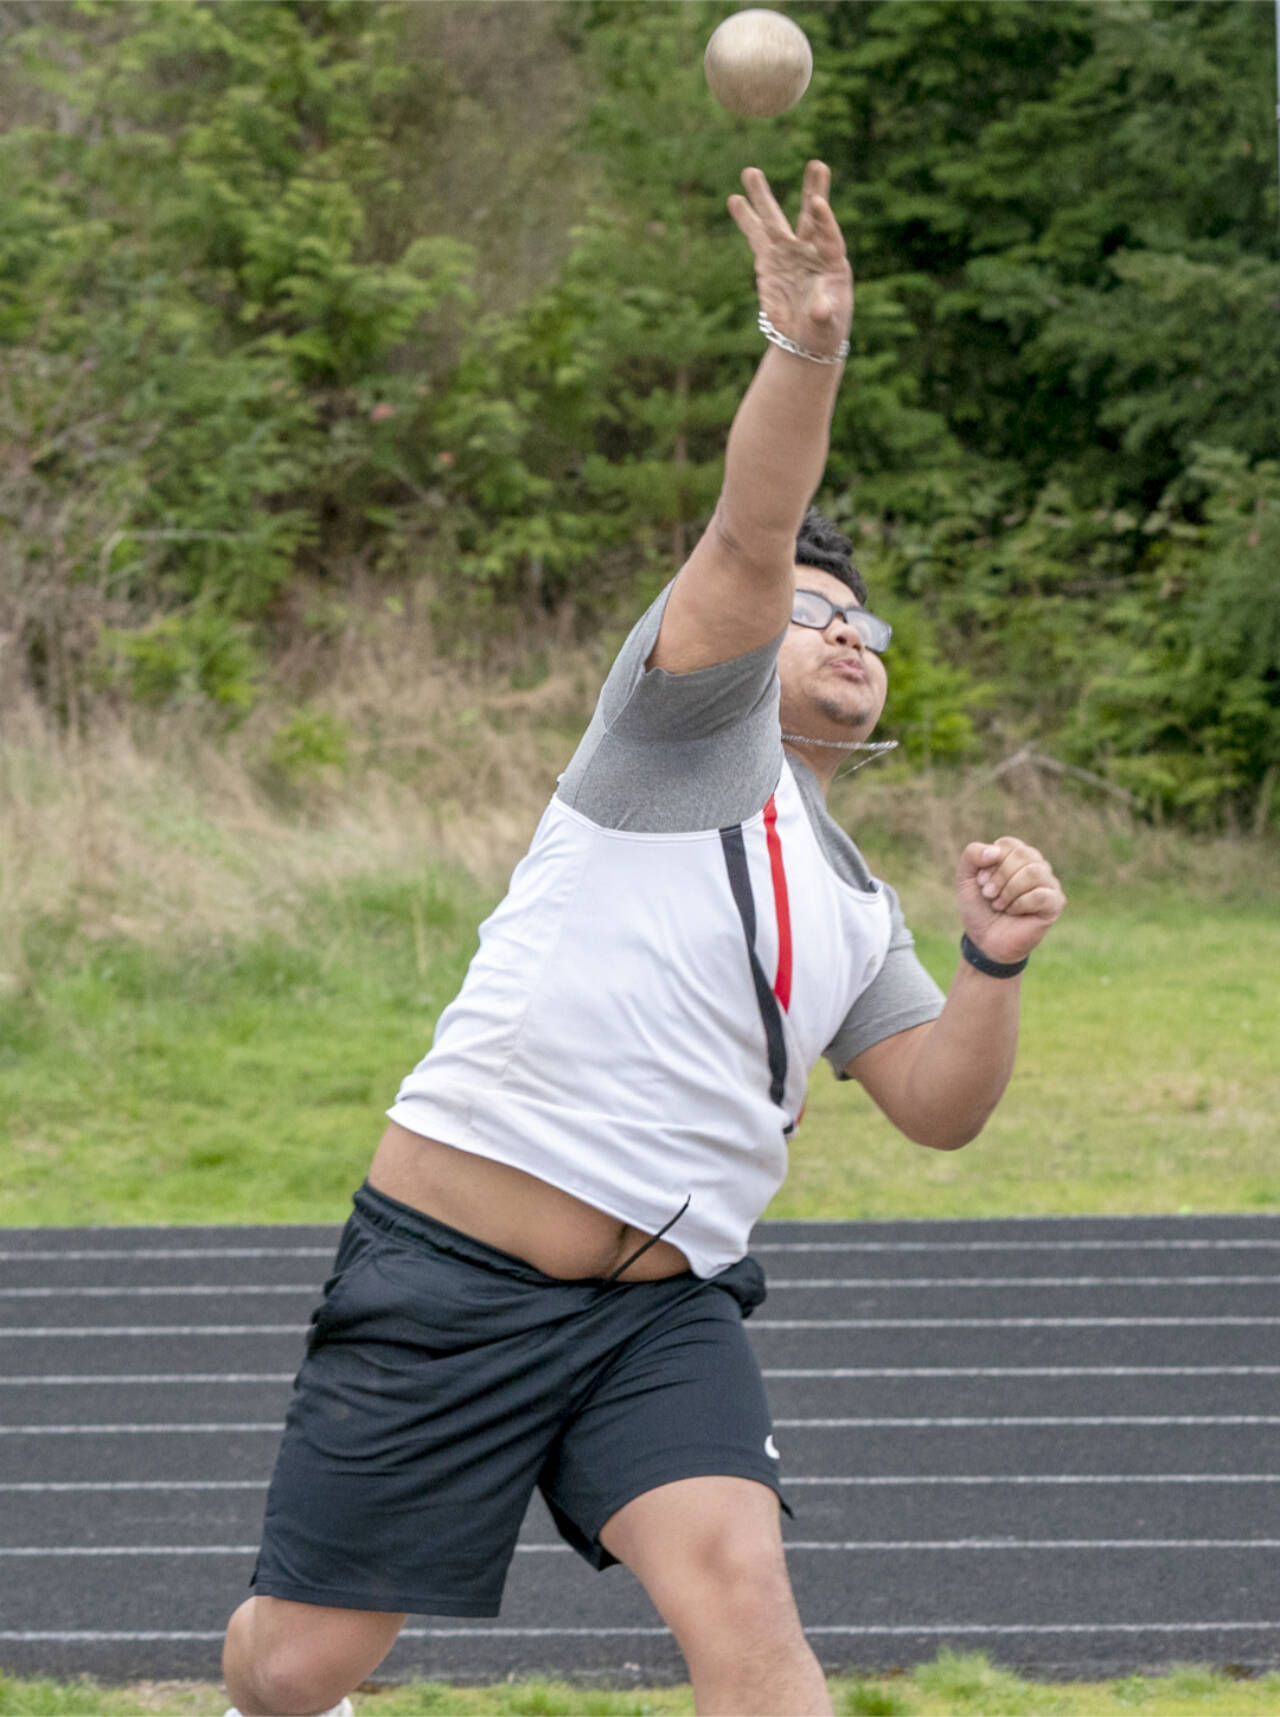 East Jefferson’s Anson Jones heaves the shot put 41 feet, 3 inches for second place in the shot put during a Nisqually League meet at Blue Heron Middle School on Tuesday. (Steve Mullensky/for Peninsula Daily News)